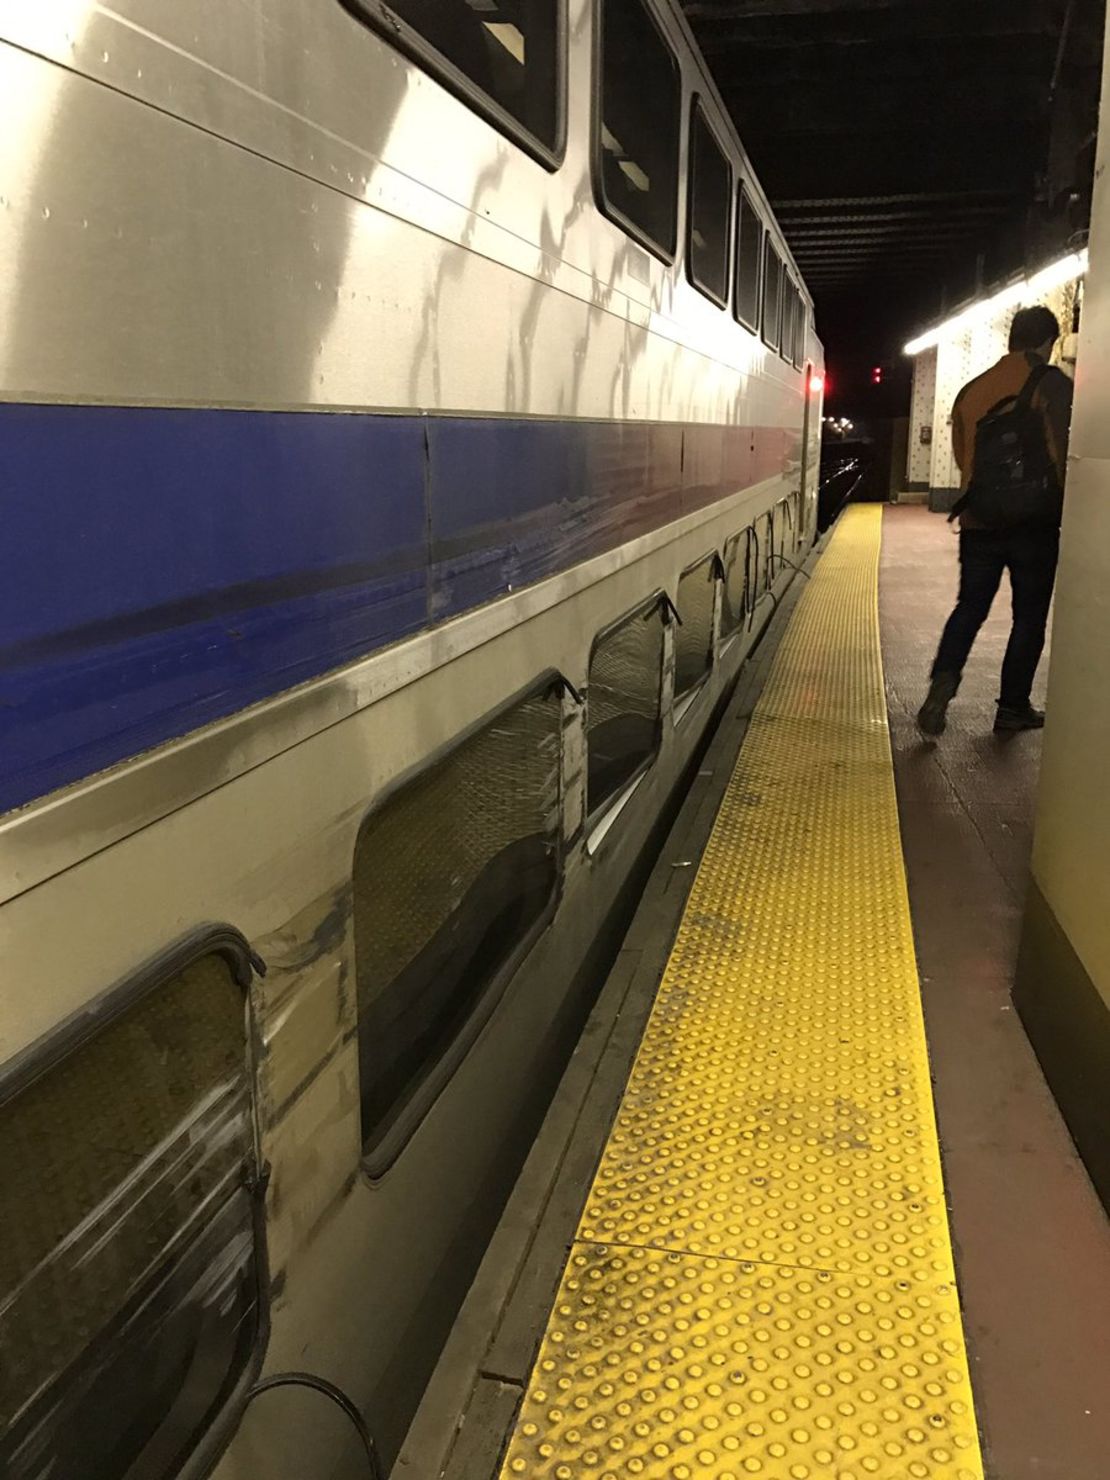 The side of an NJ Transit train was scraped by a derailed Amtrak train.